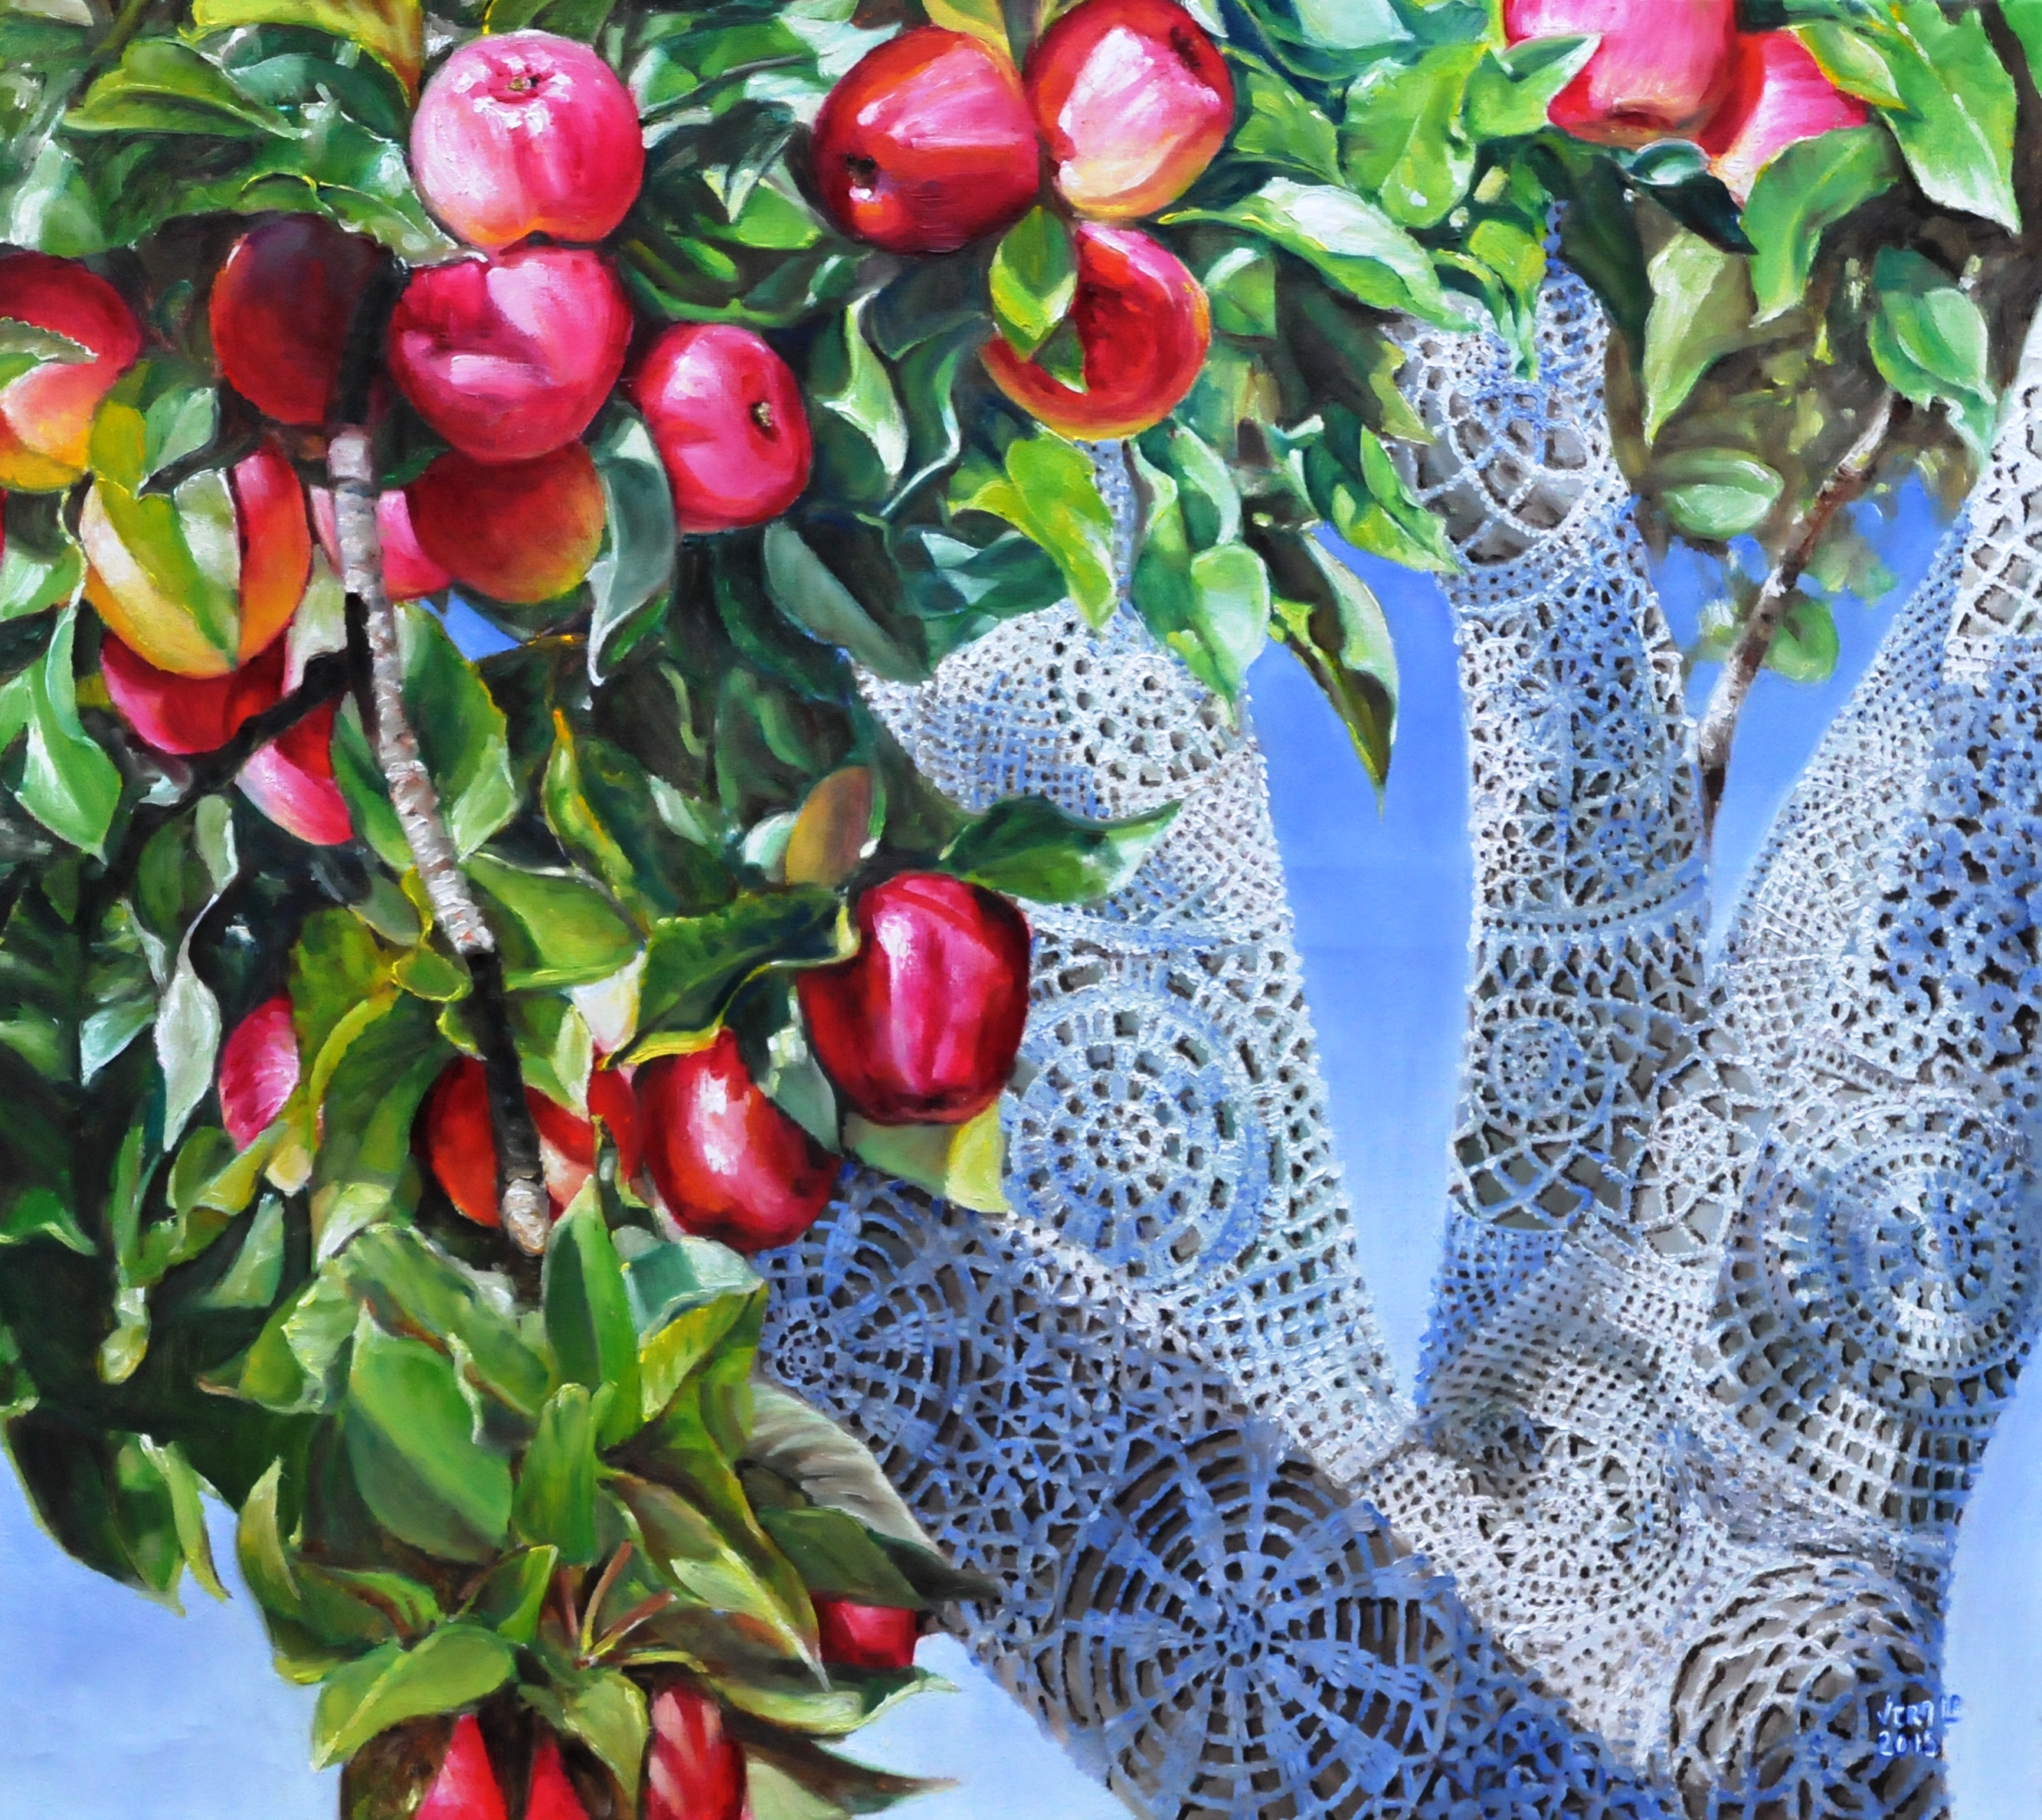 Doily apple tree | Oil paint on linen | Year: 2015 | Dimensions: 120x100cm